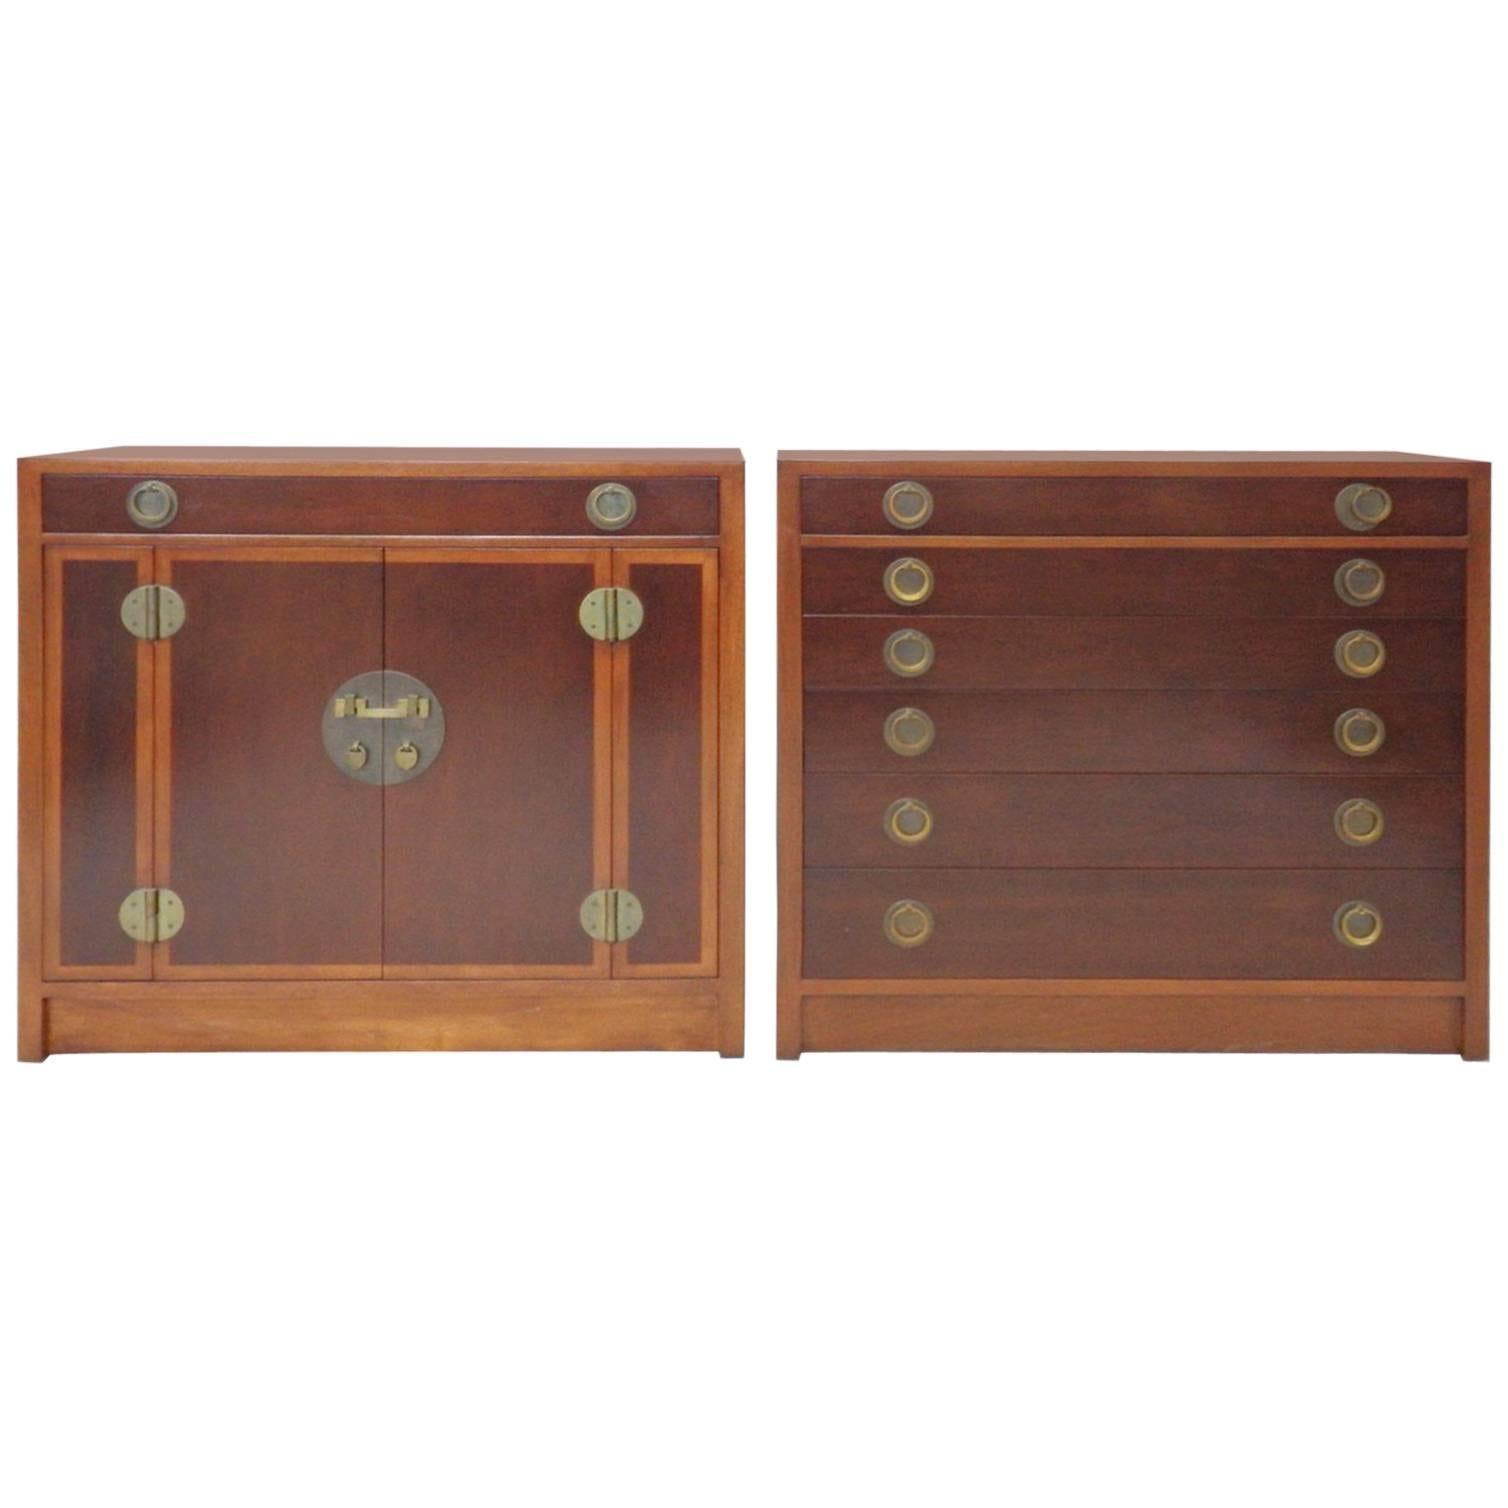 Pair of Edward Wormley for Dunbar Chests